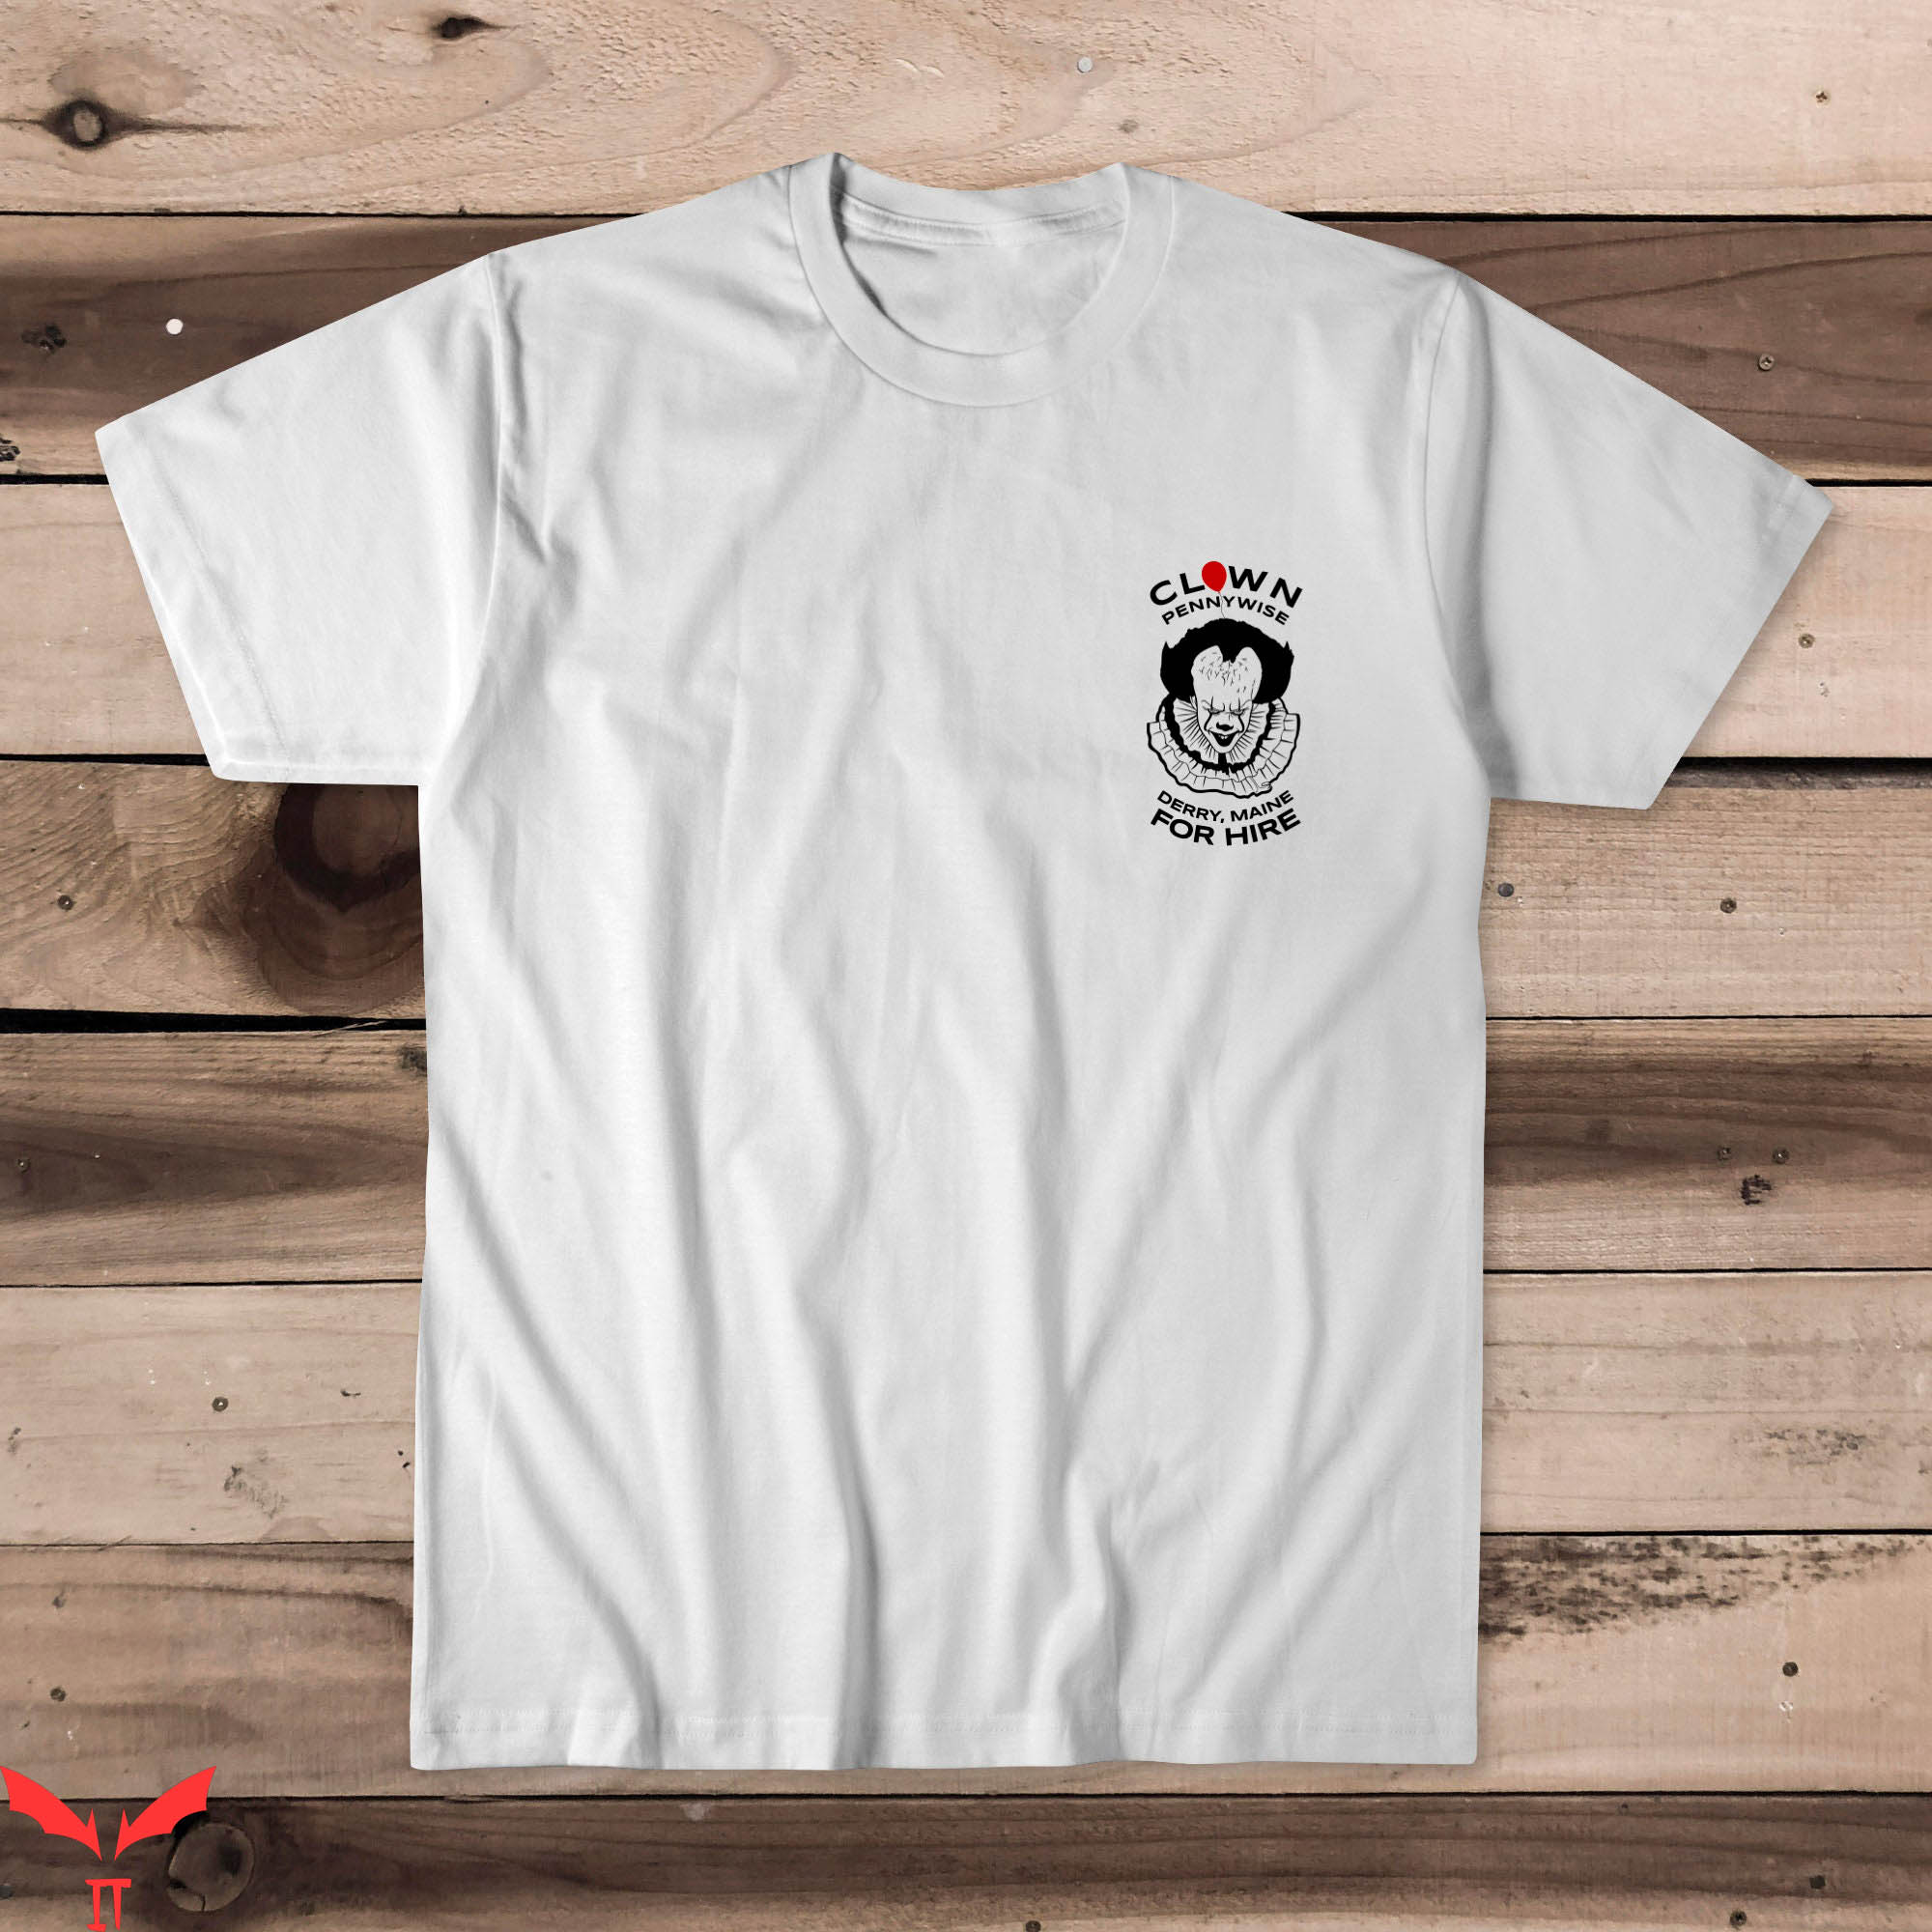 IT Pennywise T-Shirt Clown Pennywise Derry Maine For Hire